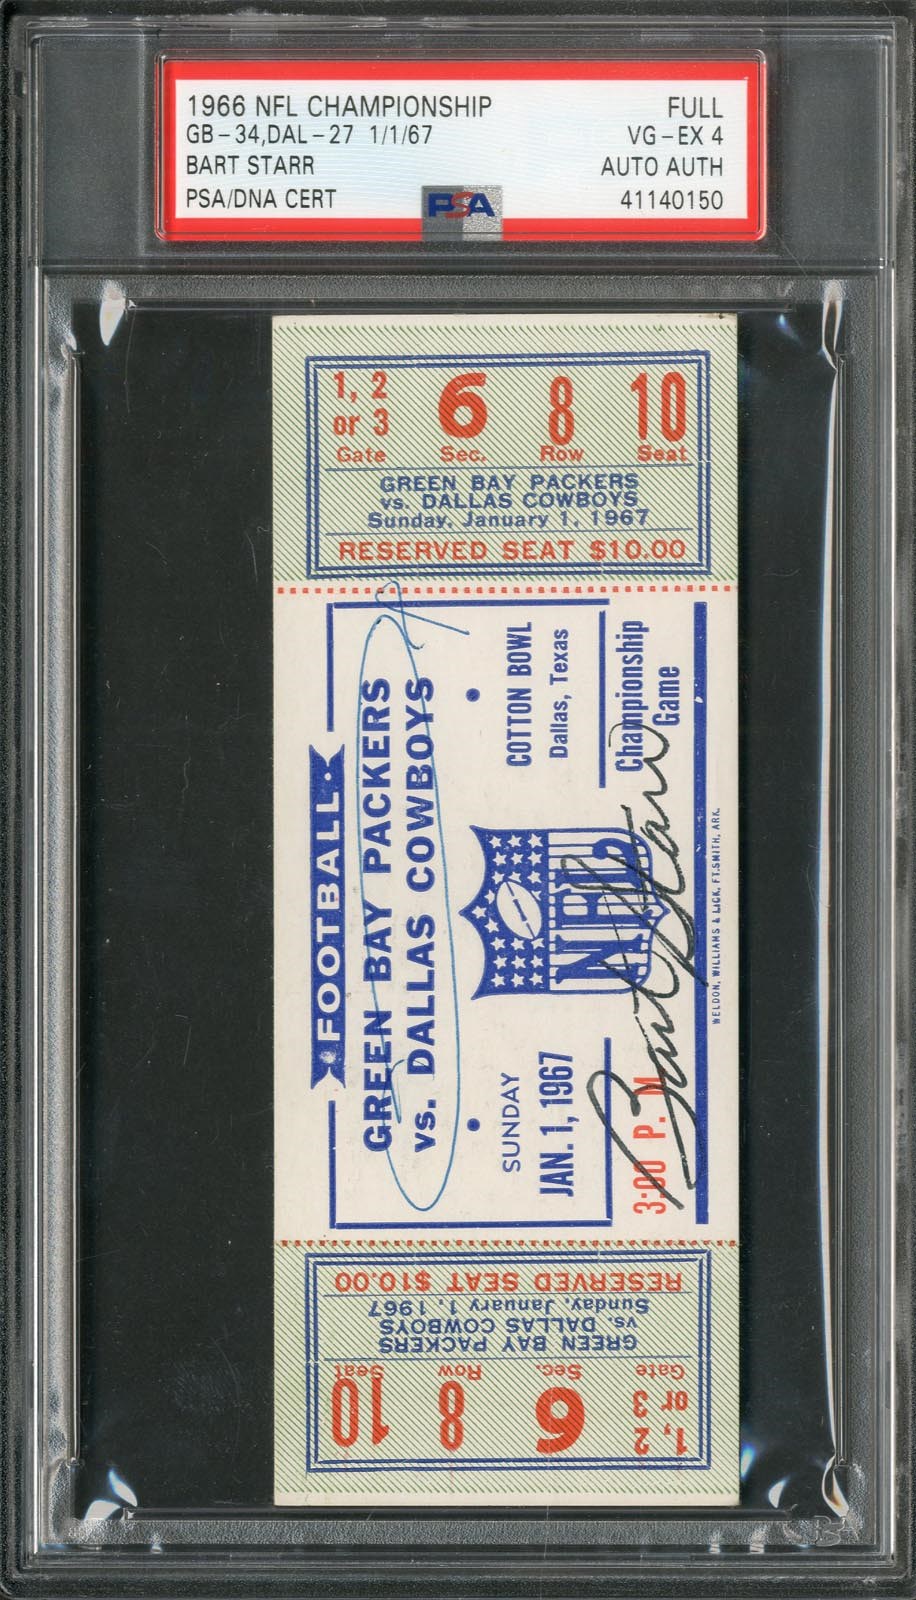 1966 NFL Championship Full Ticket Signed by Bart Starr (PSA)